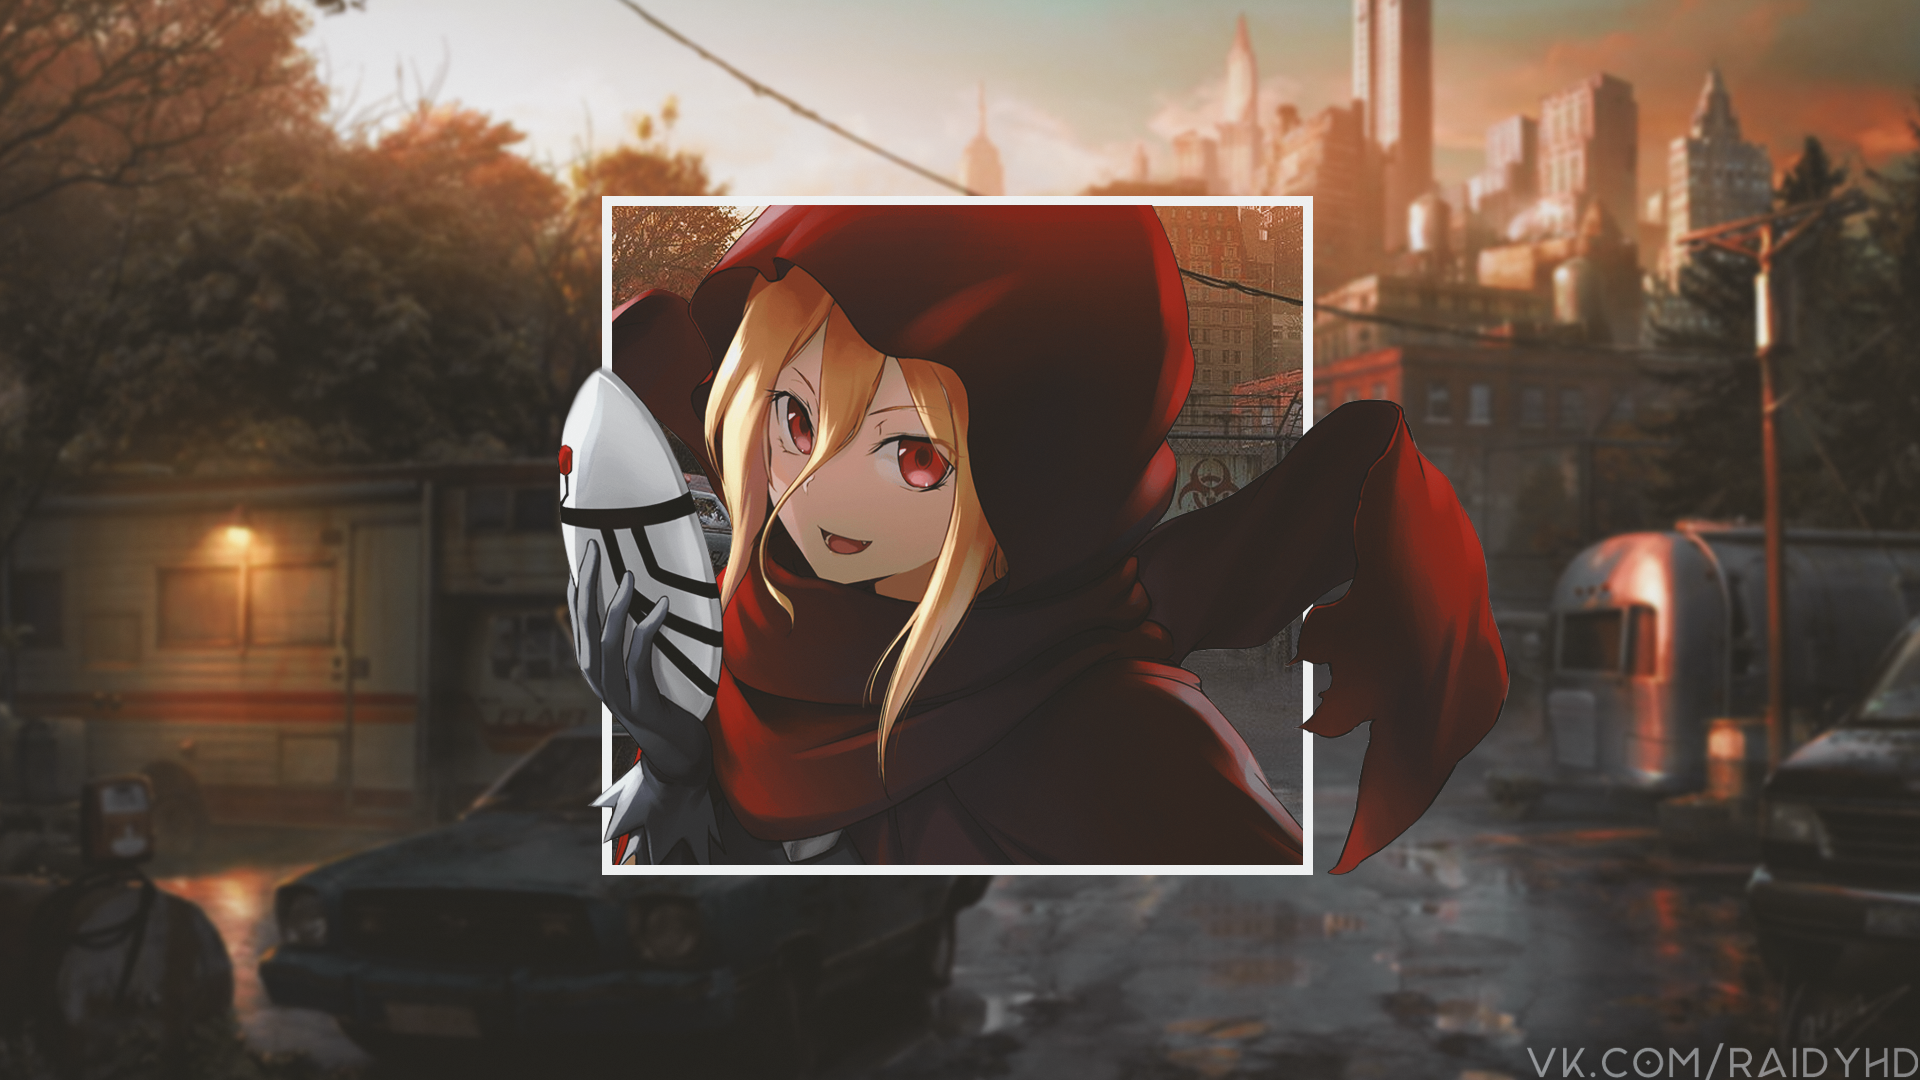 Anime Anime Girls Picture In Picture Overlord Anime Evileye Overlord 1920x1080